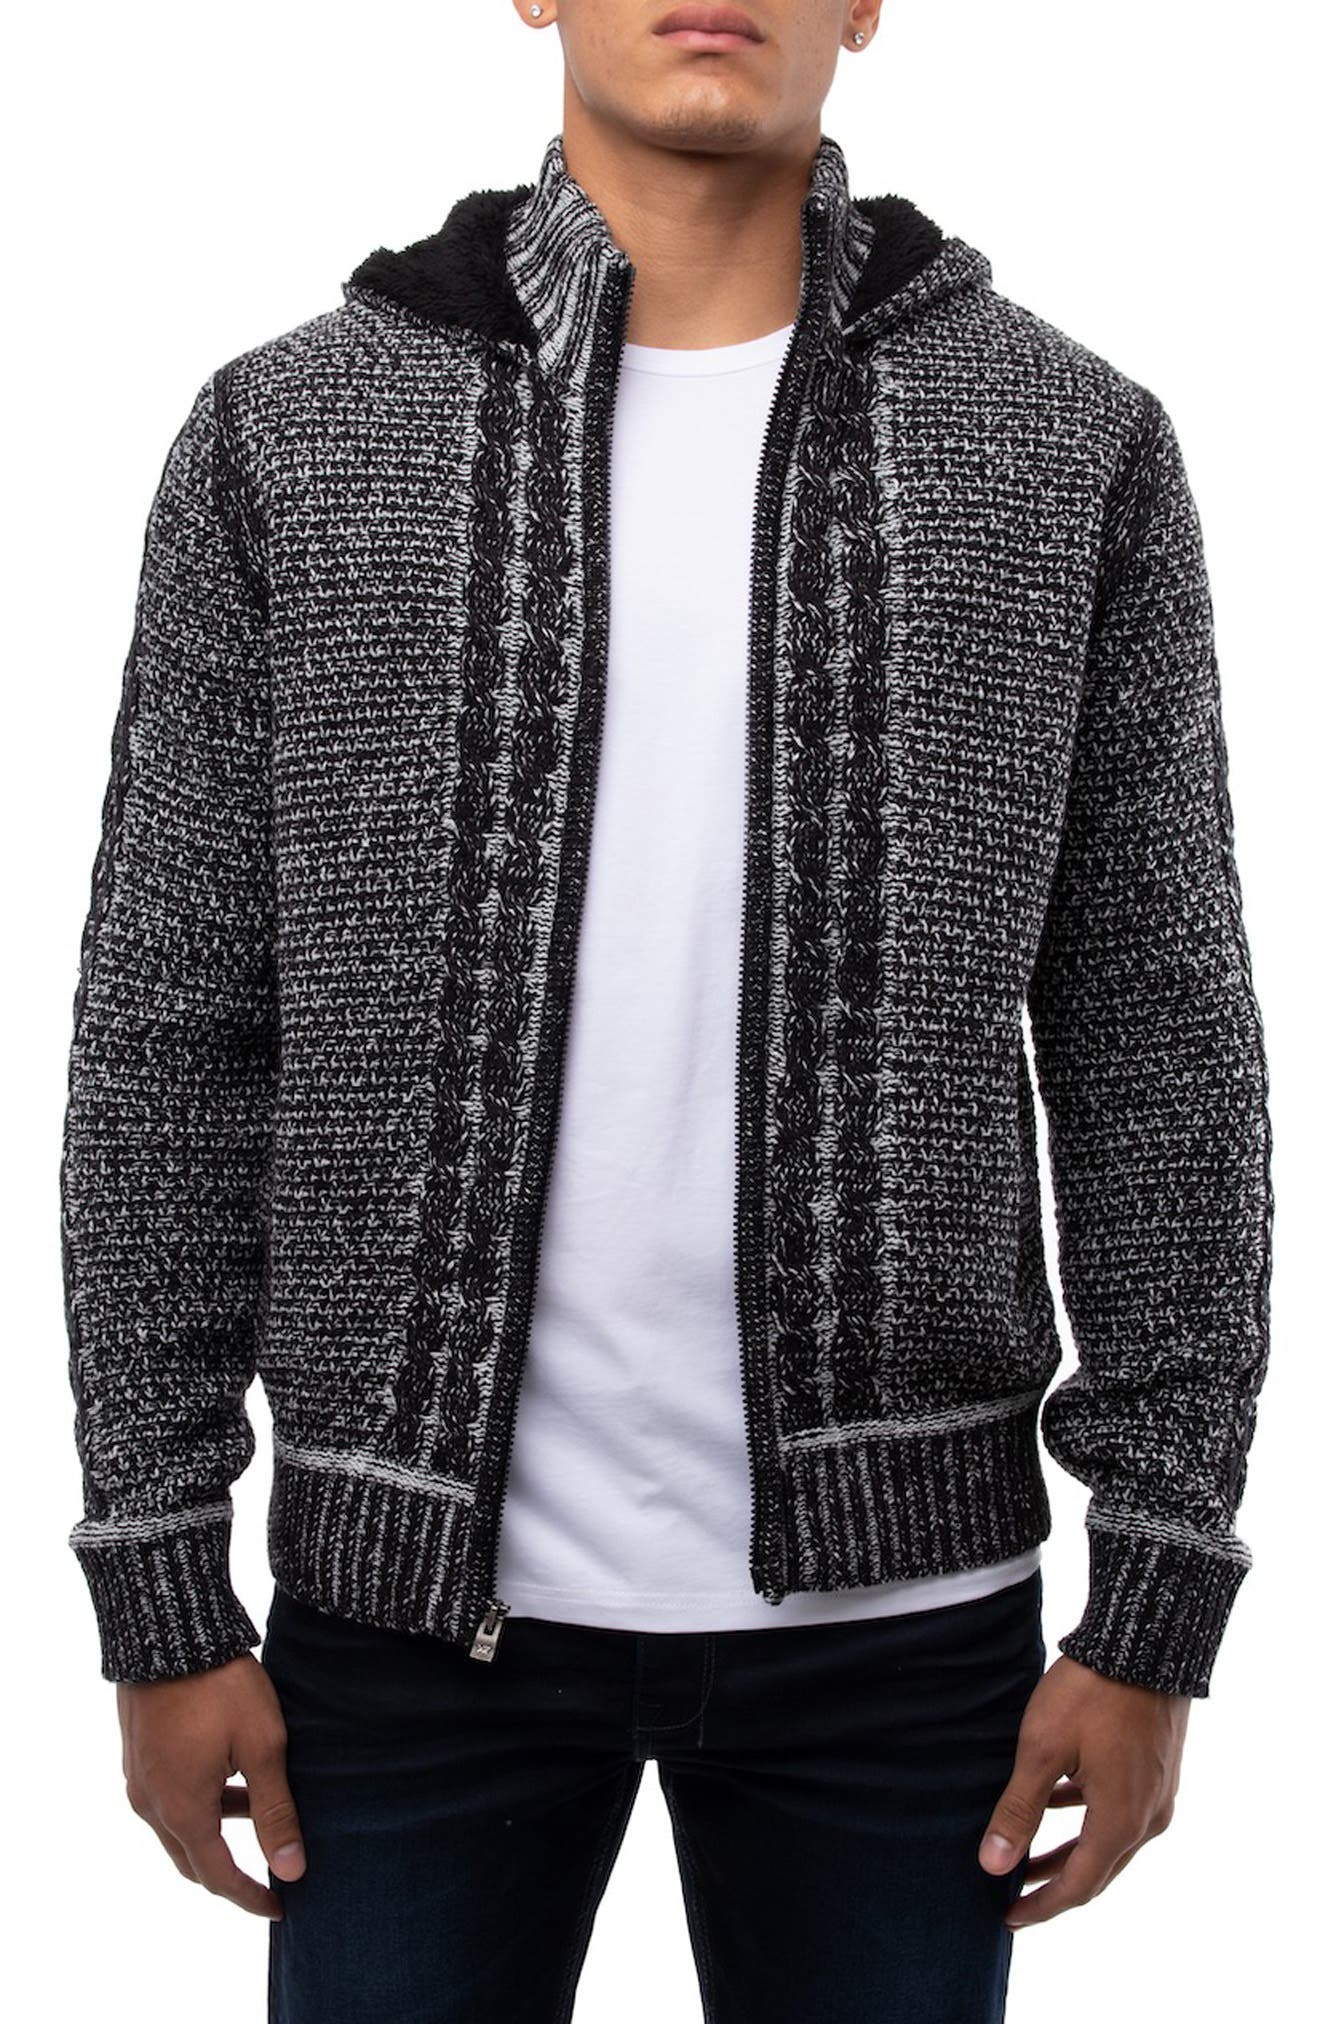 Mens Location Black Synthesis Knitted Jacket Full Zip Cotton Hooded Cardigan 